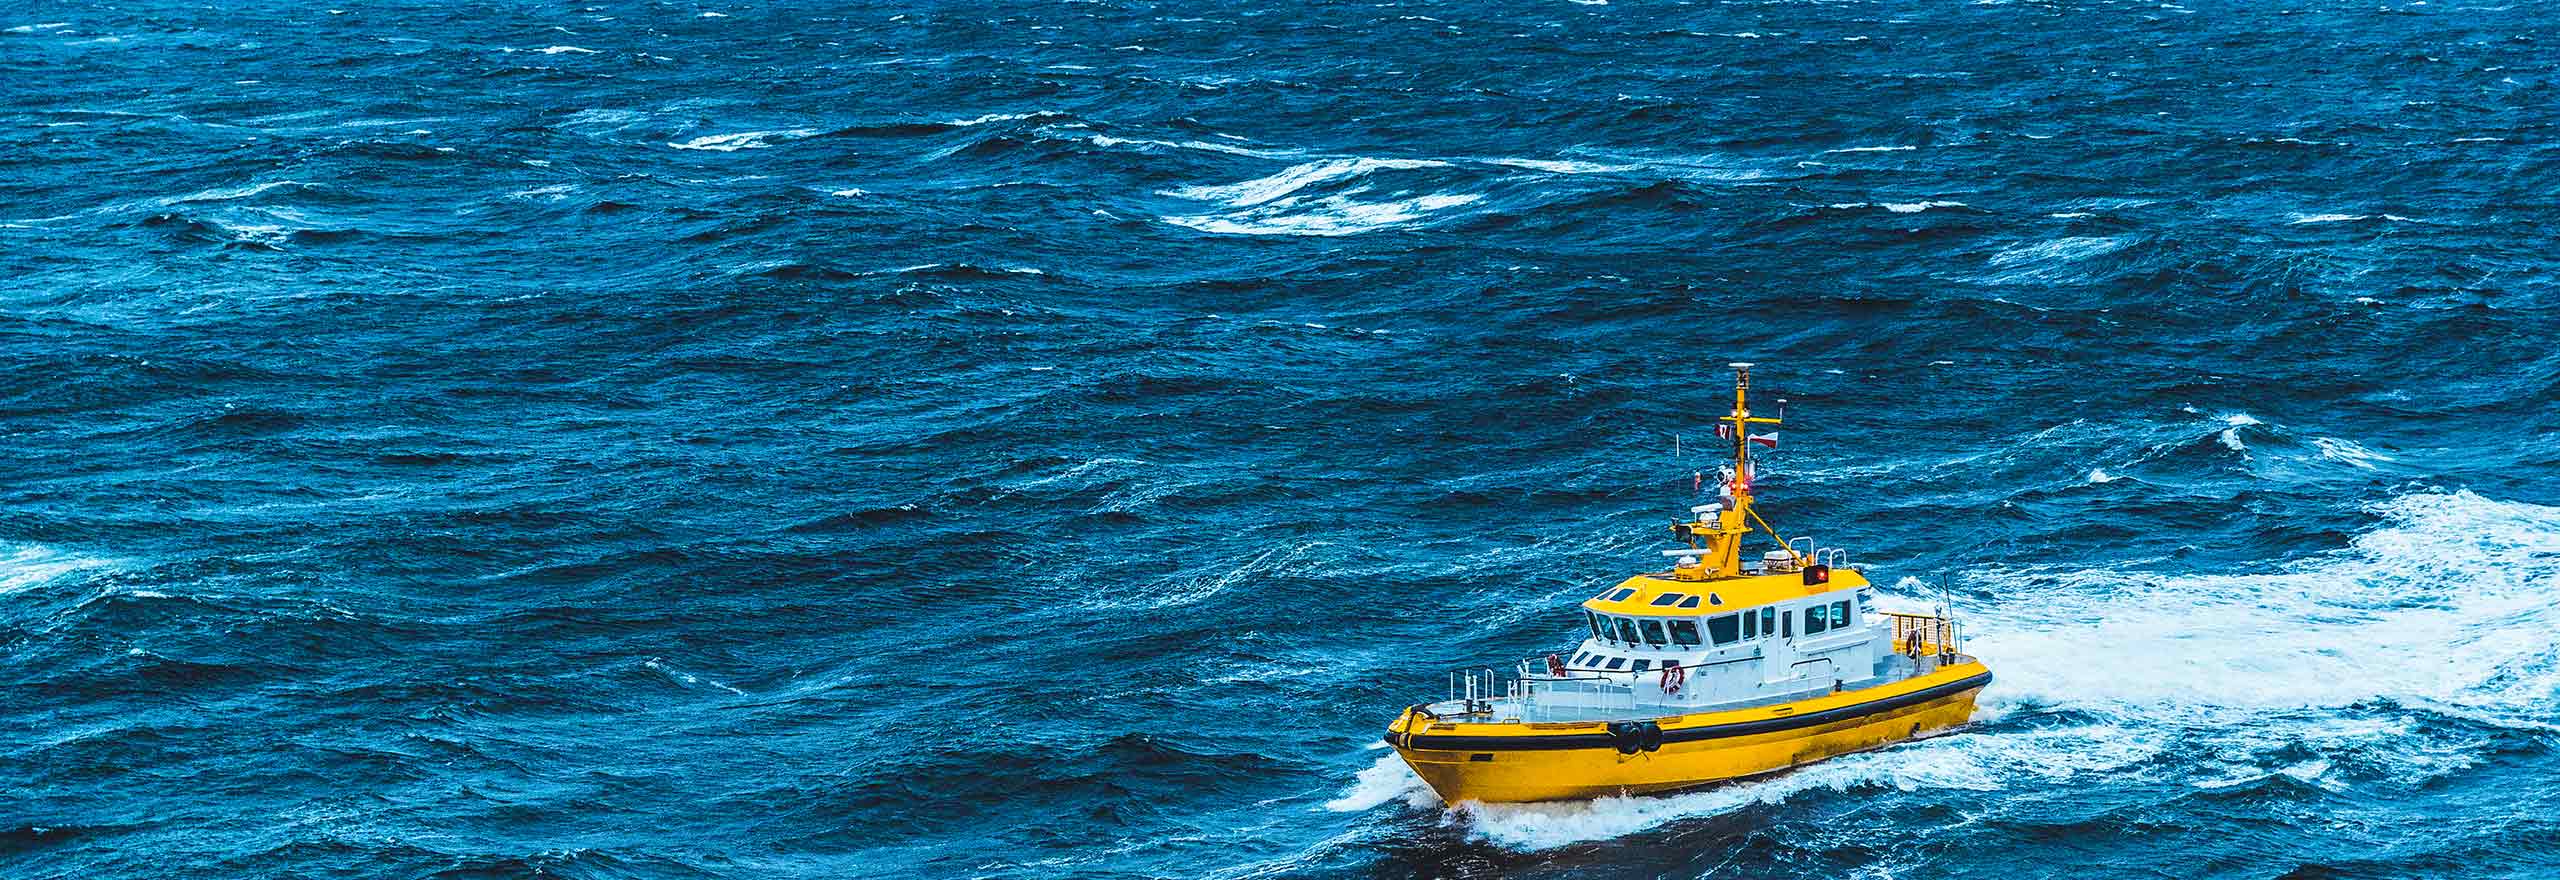 A yellow coast guard vessel is shown offshore in a choppy, stormy sea.